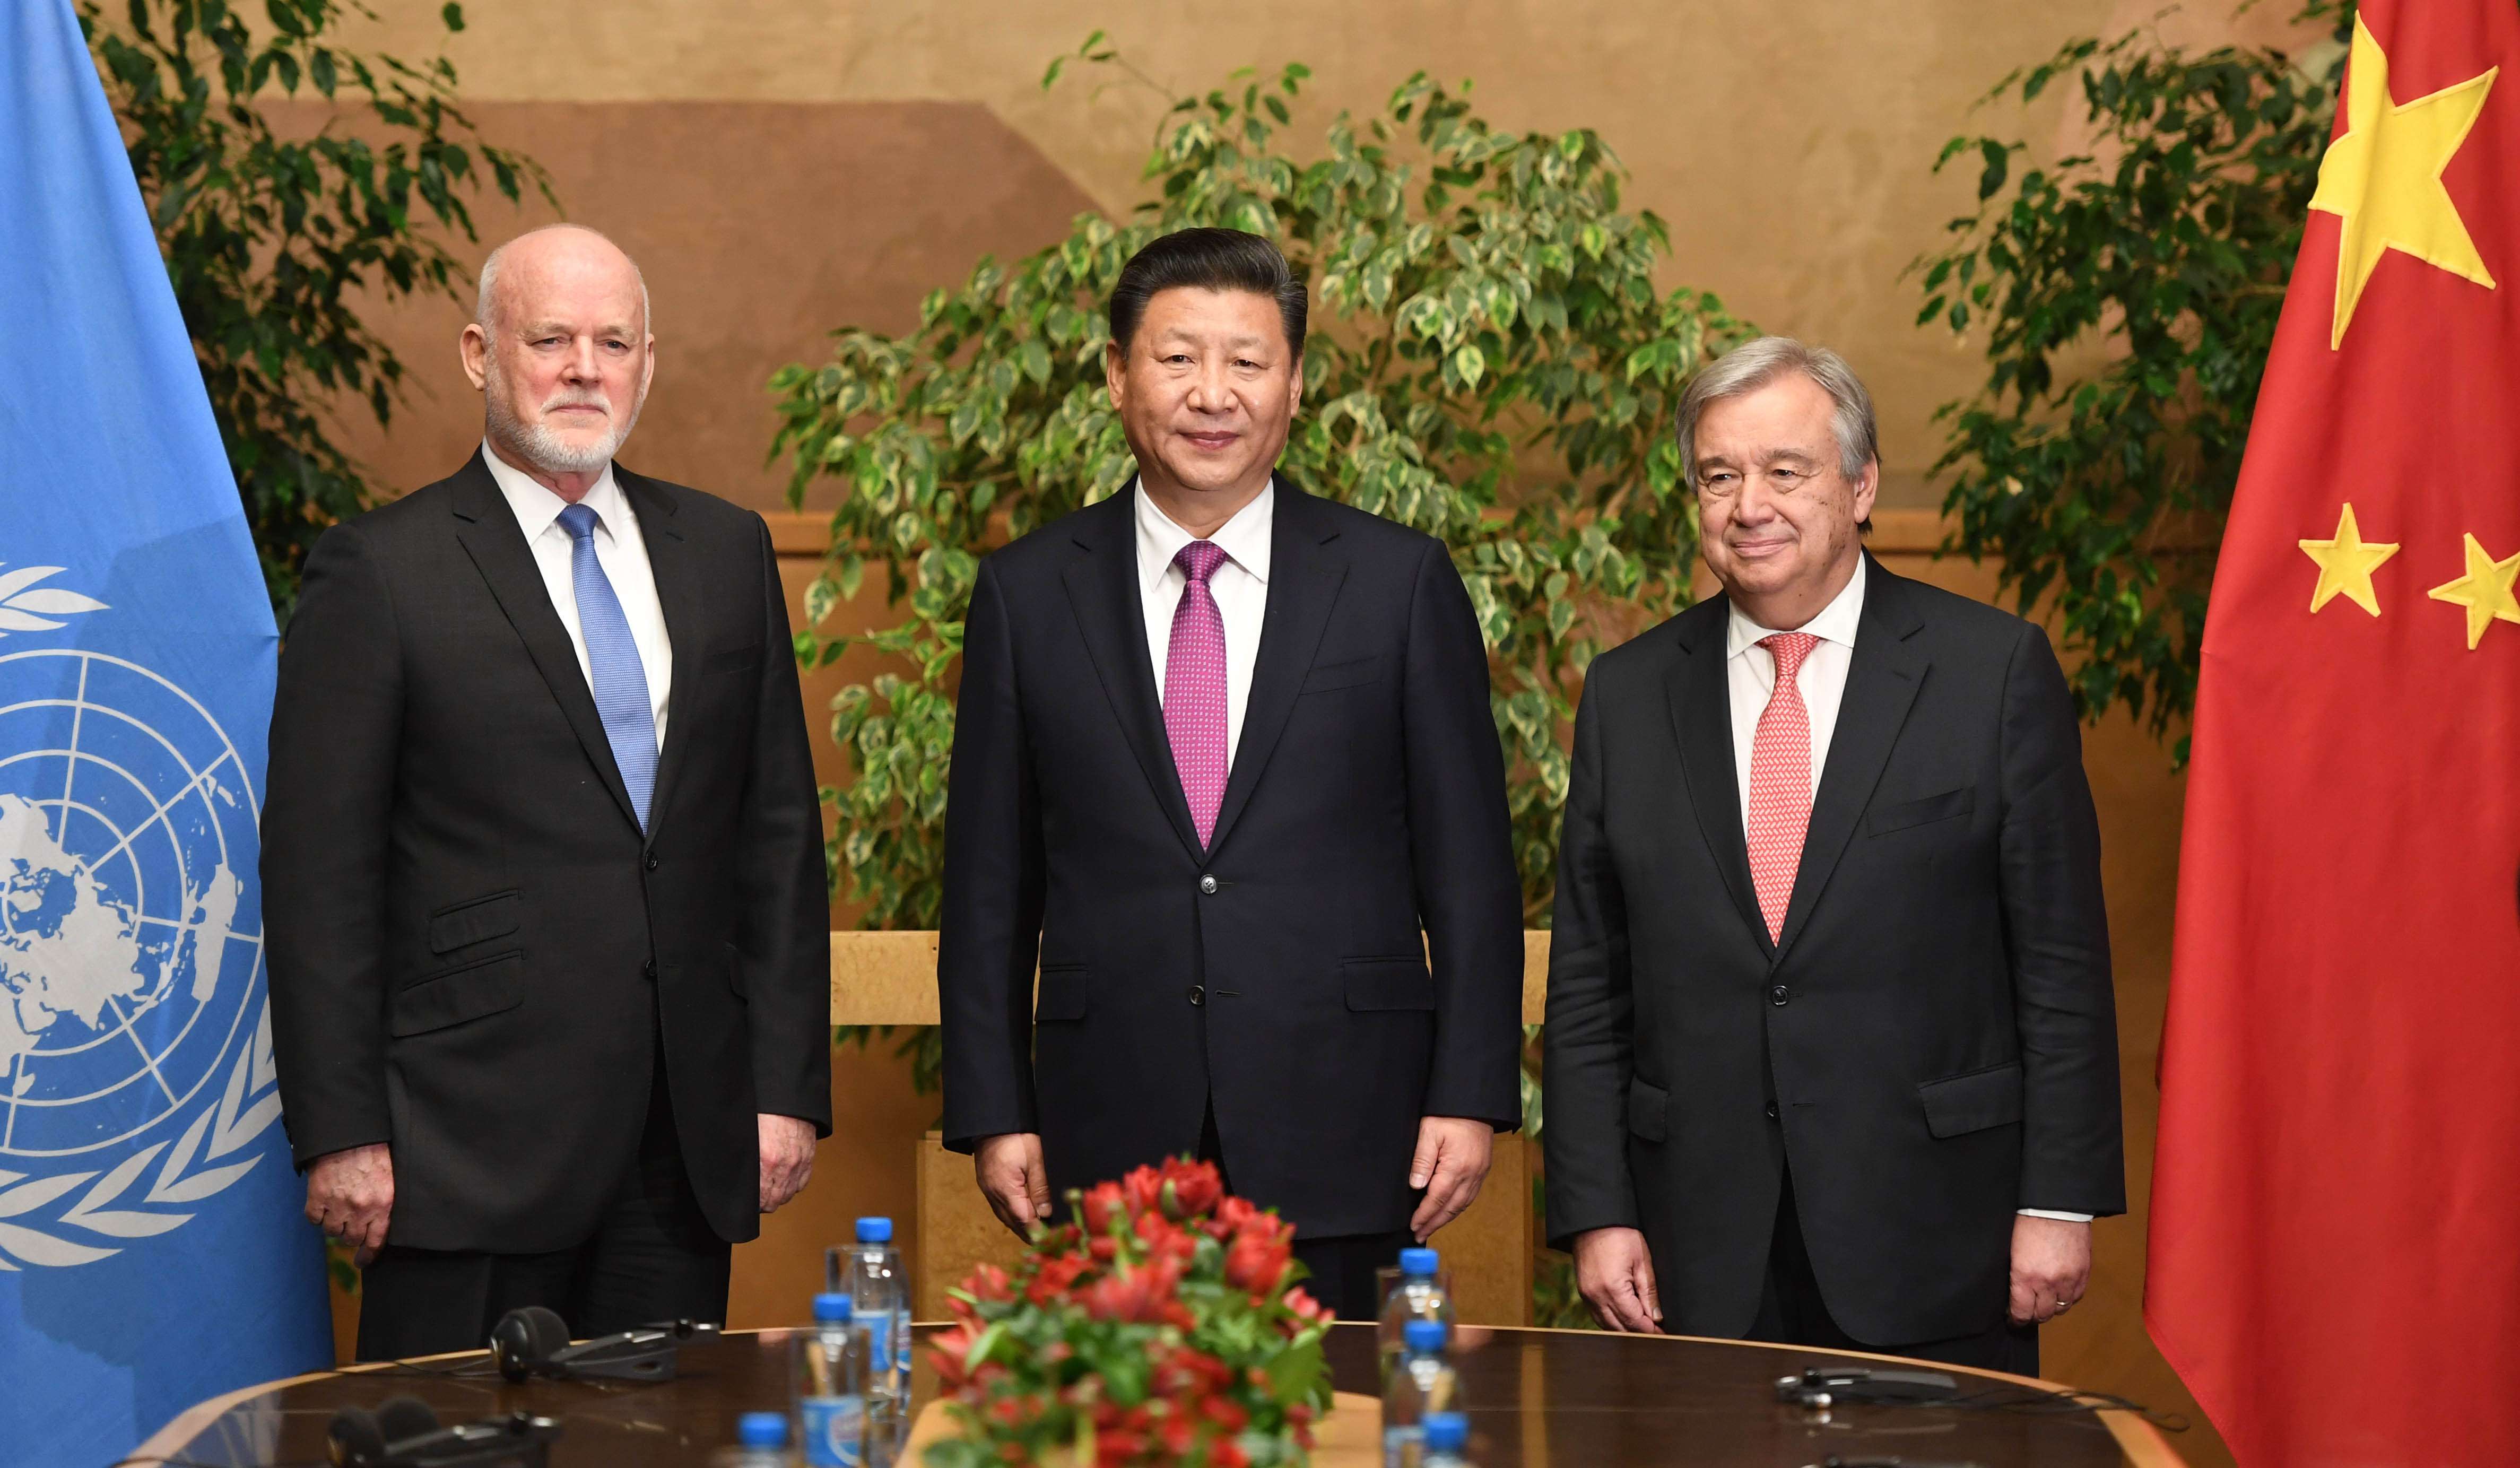 President Xi Jinping with new UN Secretary General Antonio Guterres (right) and Peter Thomson of Fiji, president of the 71st session of the UN General Assembly, in Geneva on January 18. Photo: Xinhua